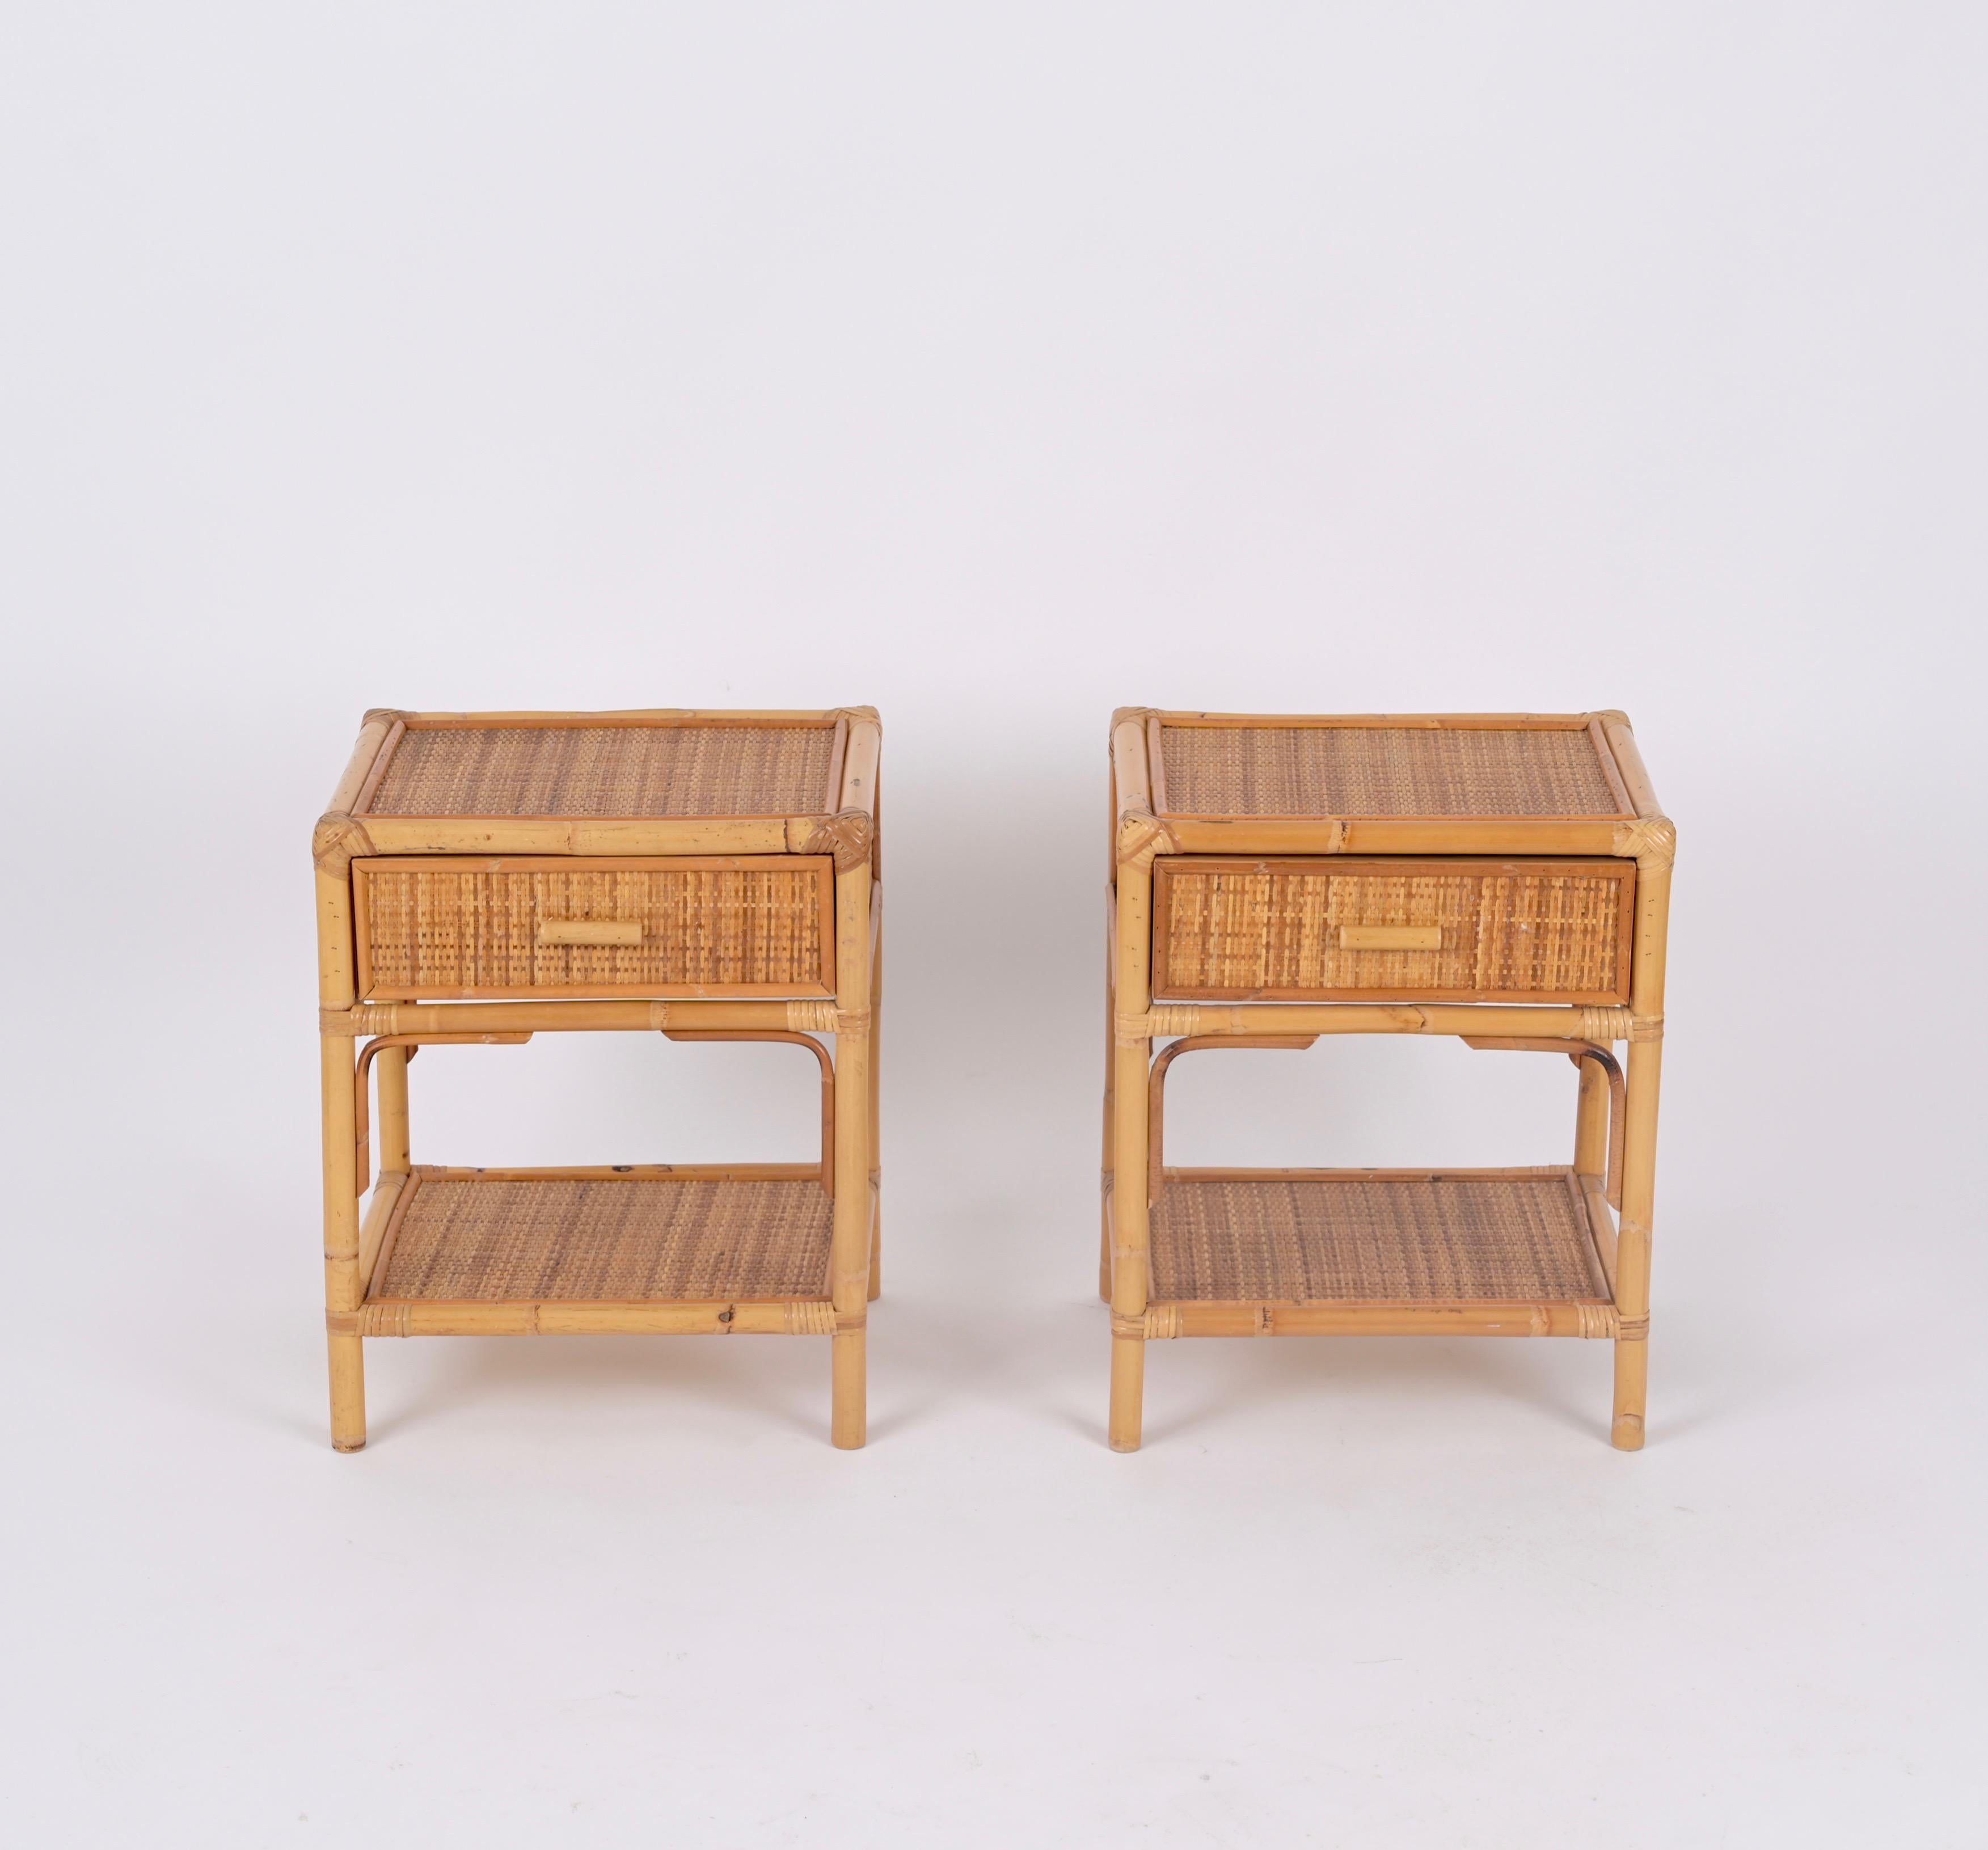 Mid-Century Modern Pair of French Riviera Nightstands in Rattan, Bamboo and Wicker, Italy 1970s